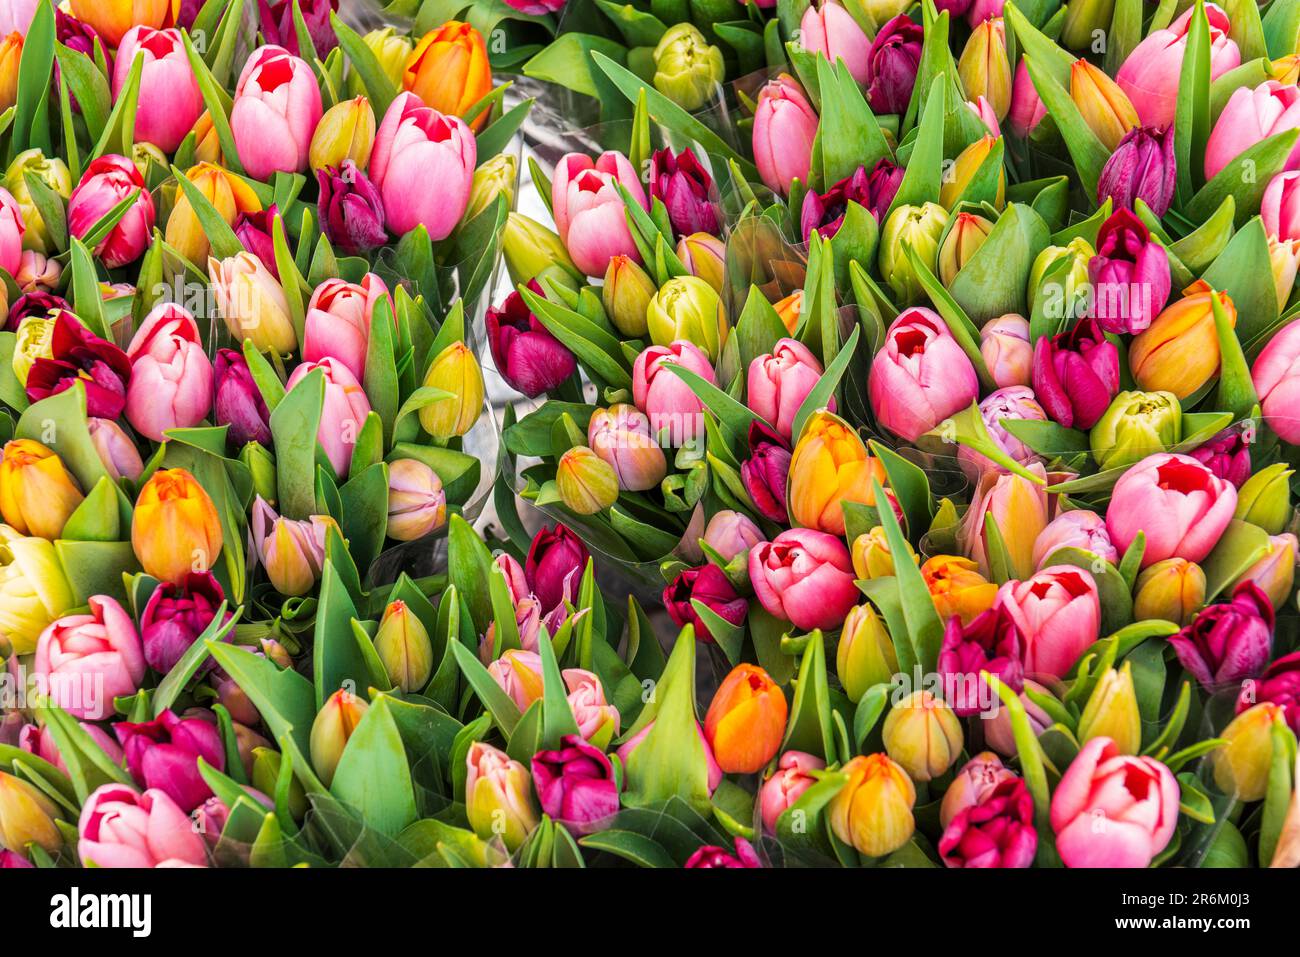 Colourful fresh tulips on sale in flower market, Amsterdam, Netherlands, Europe Stock Photo